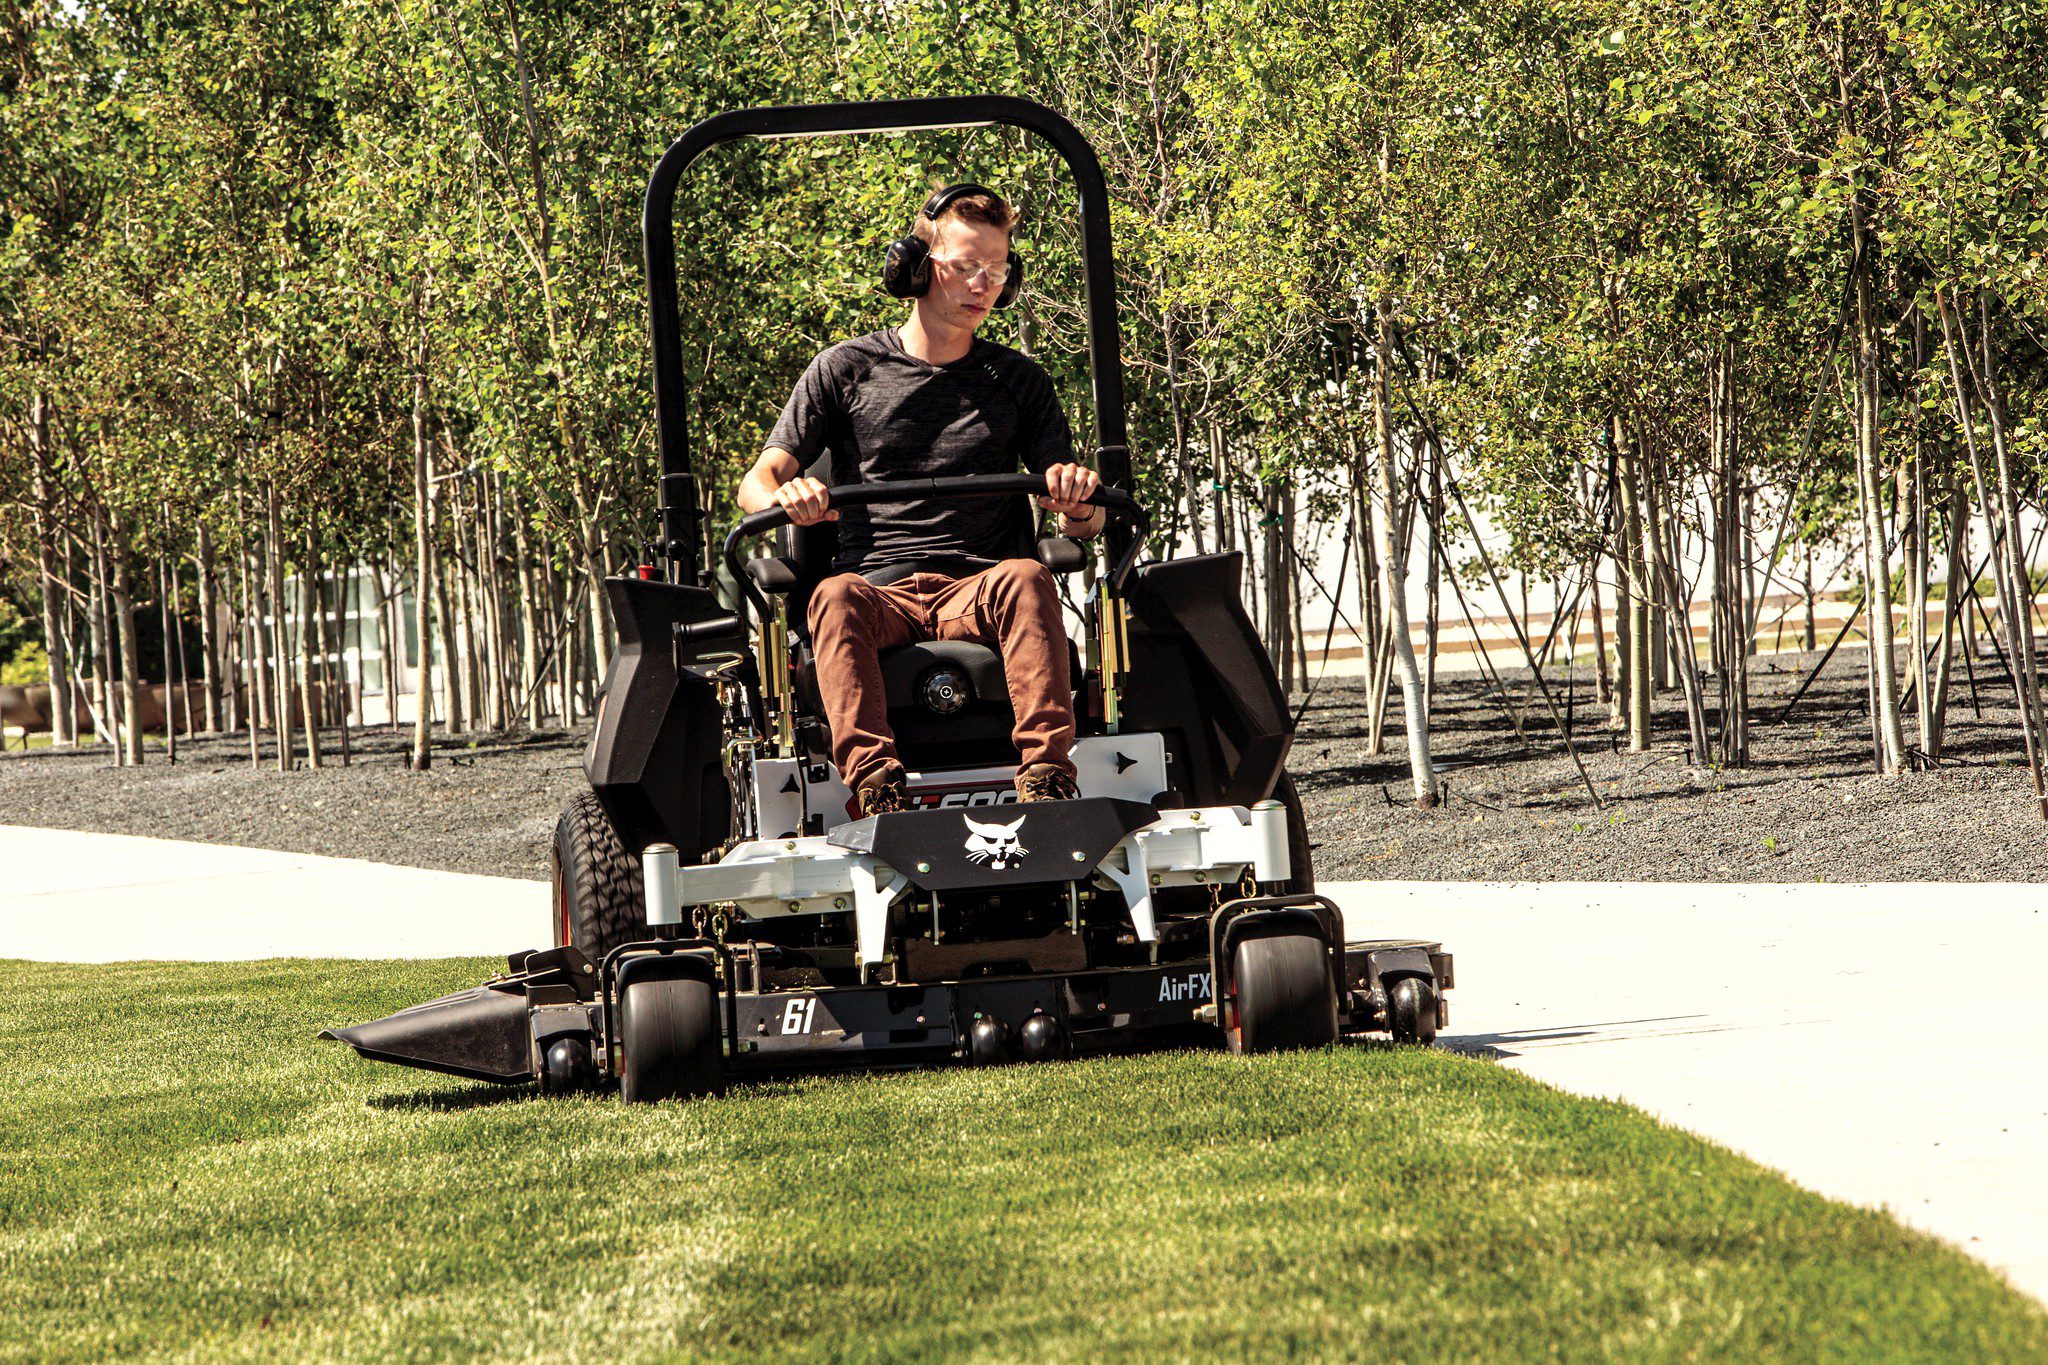 Browse Specs and more for the Bobcat ZT6000 Zero-Turn Mower 61″ - Bobcat of Huntsville